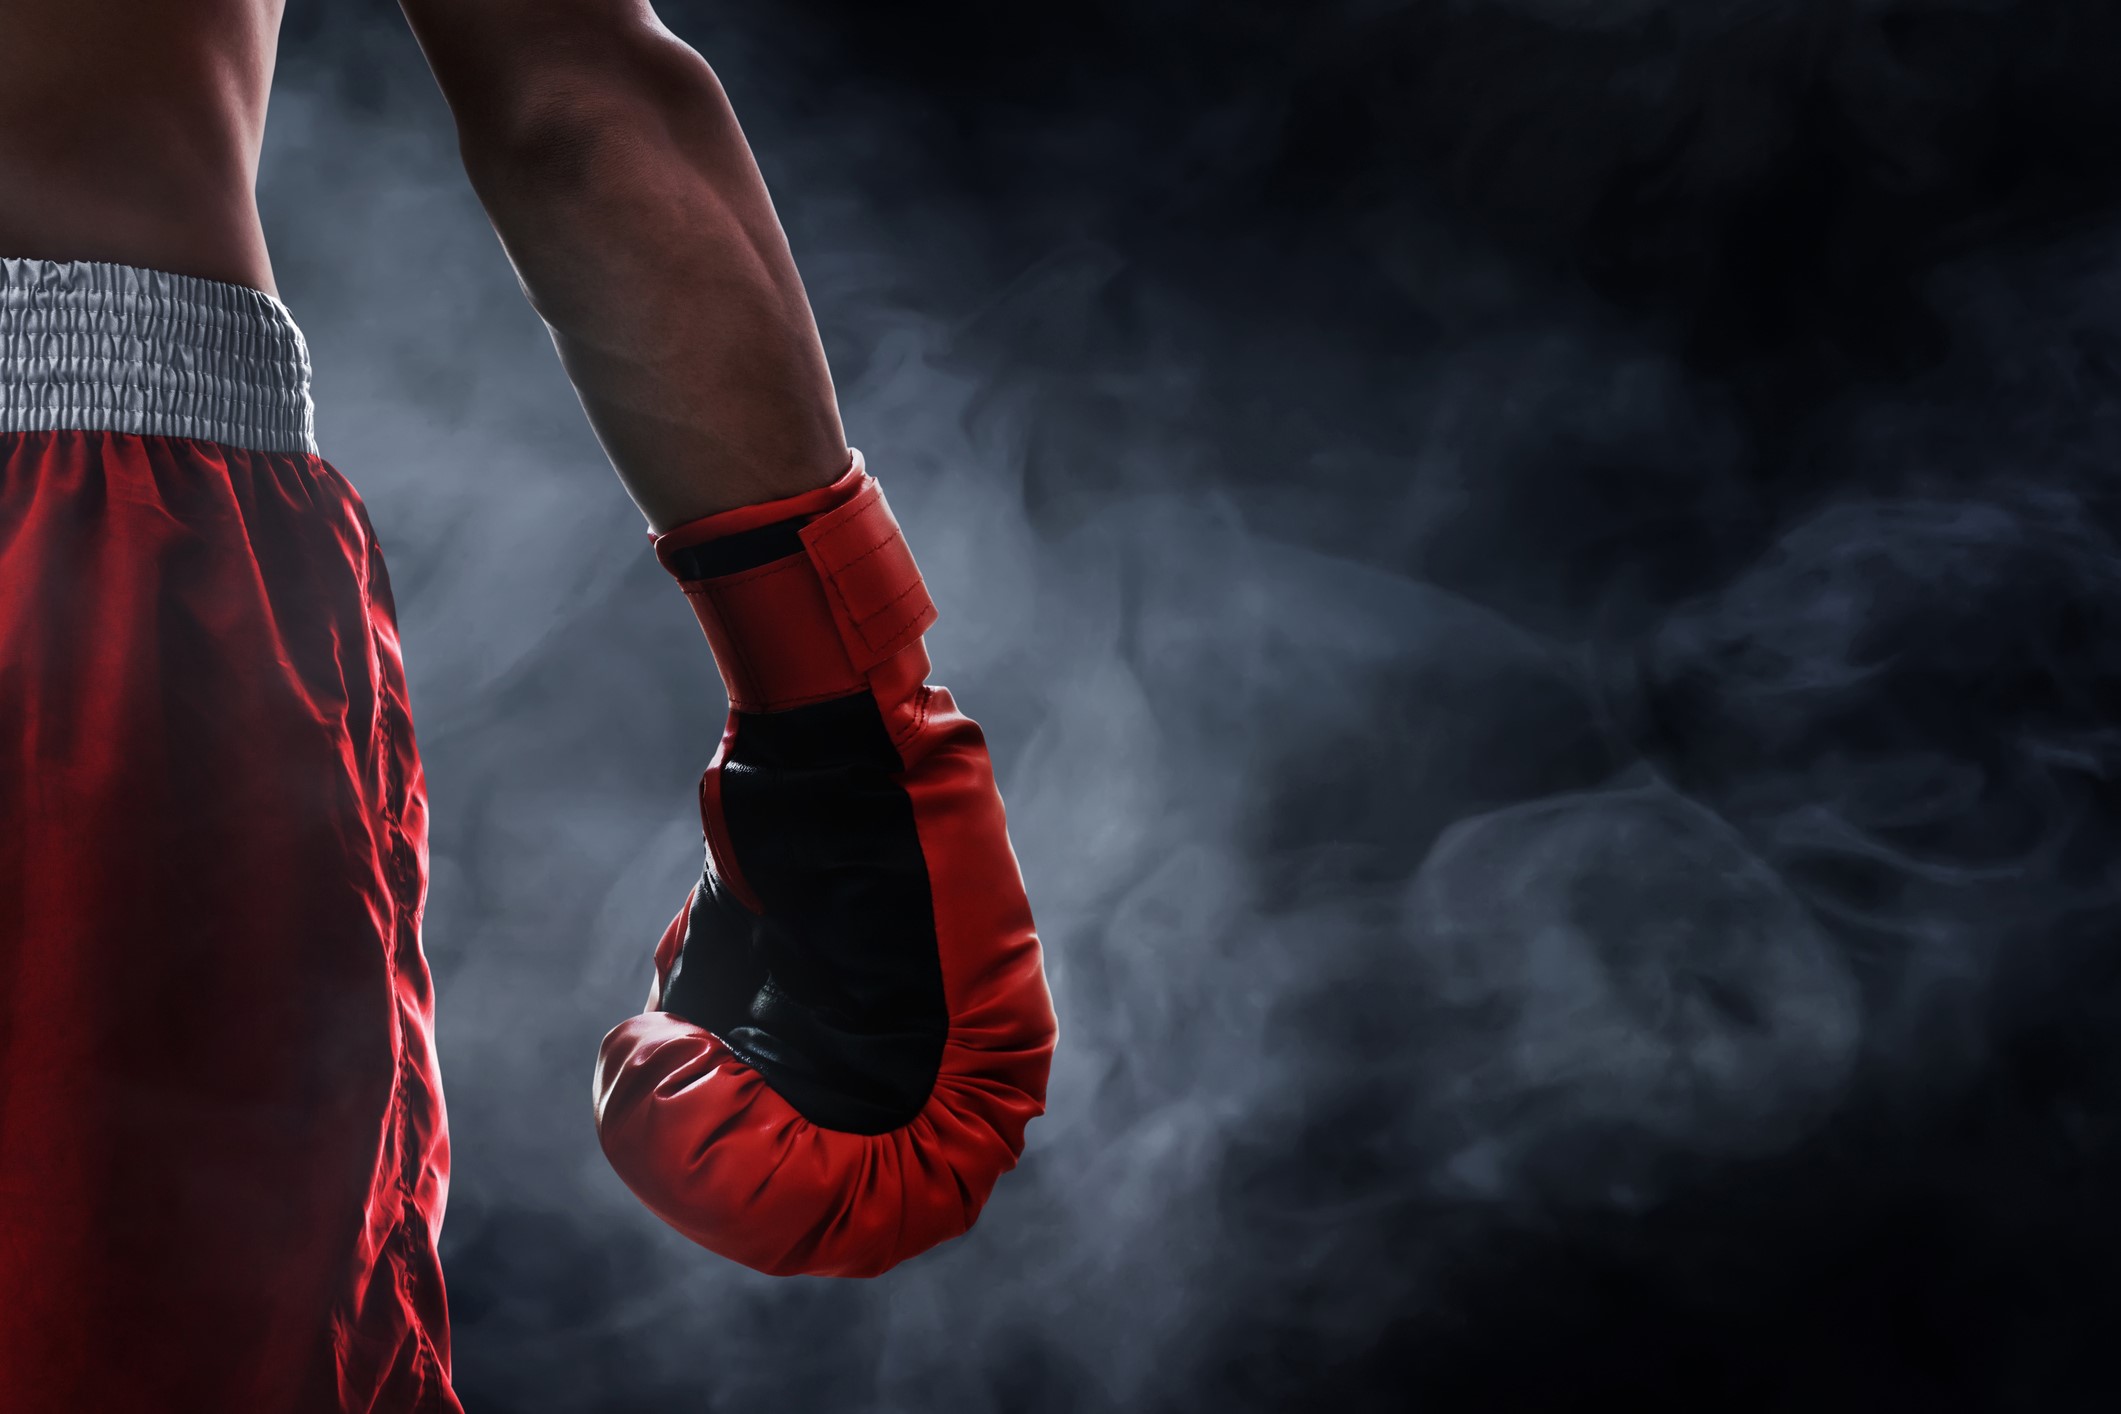 Why is betting on boxing becoming so popular?